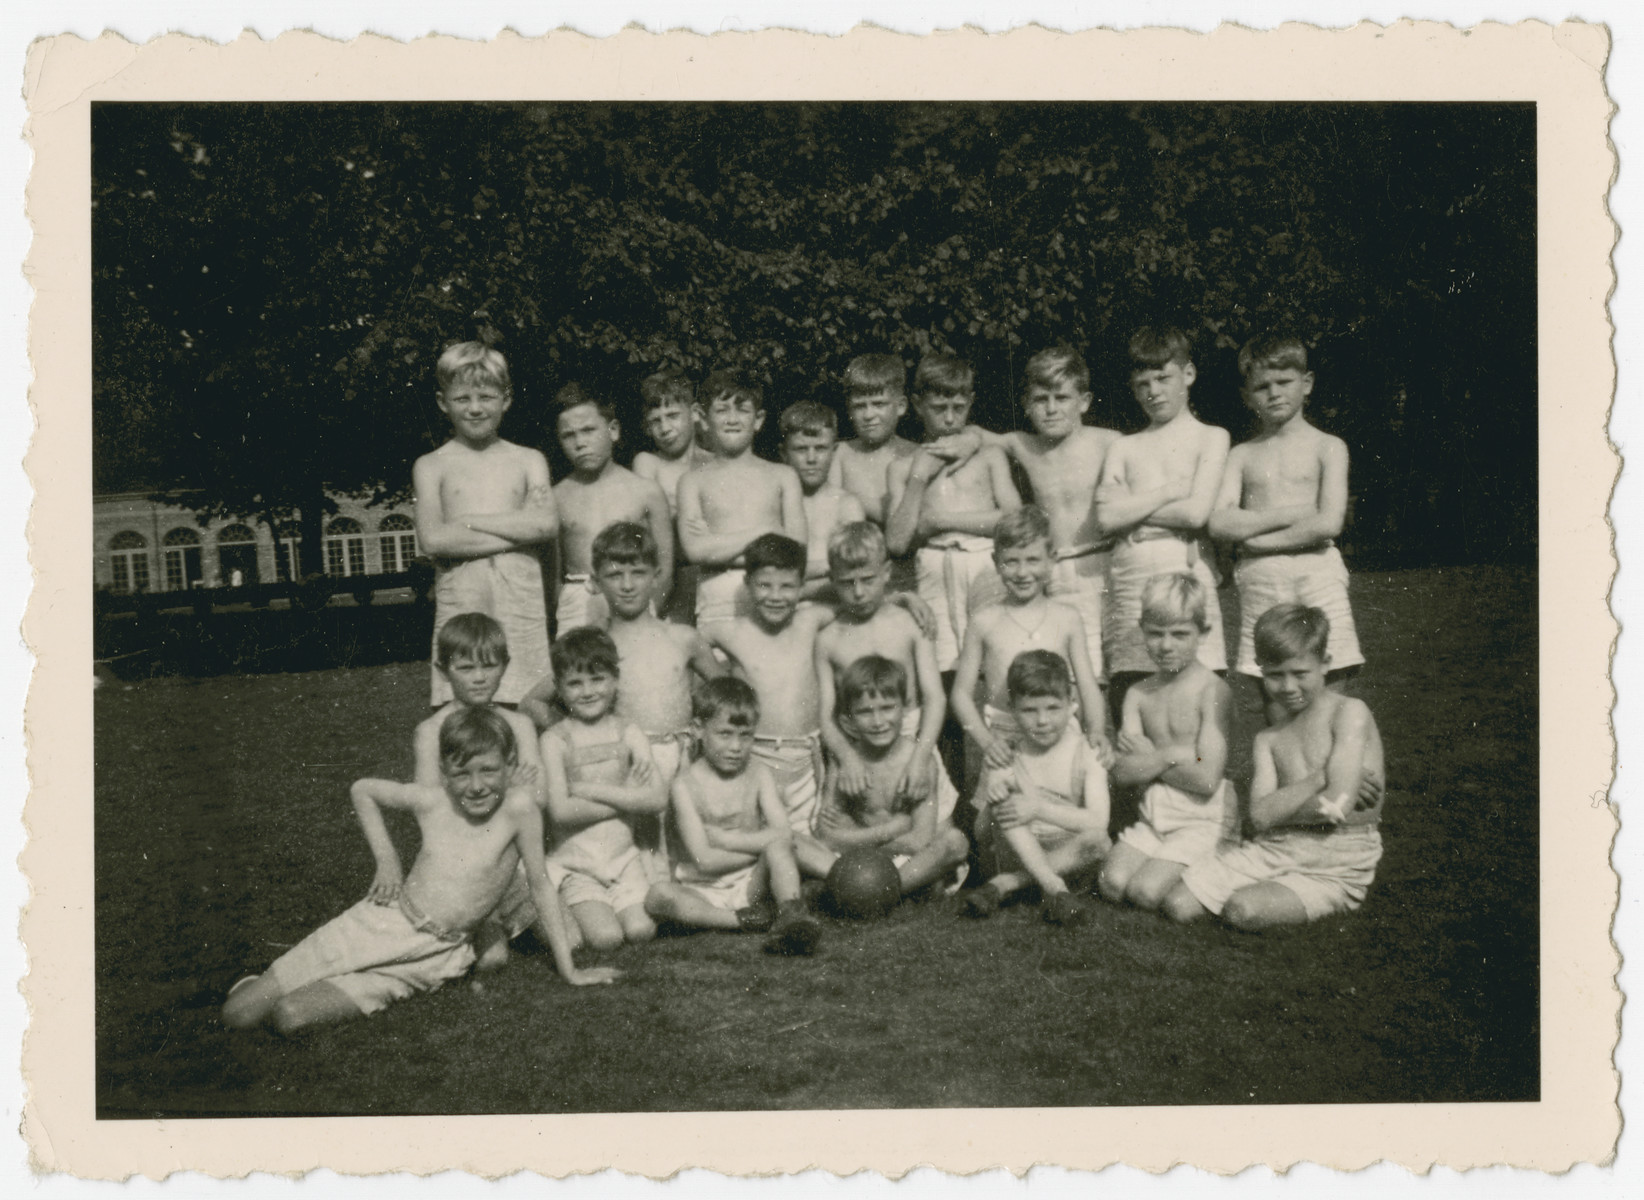 Elementary school boys, many of them Jewish children in hiding, pose on the grounds of the Chateau de Beloeil.